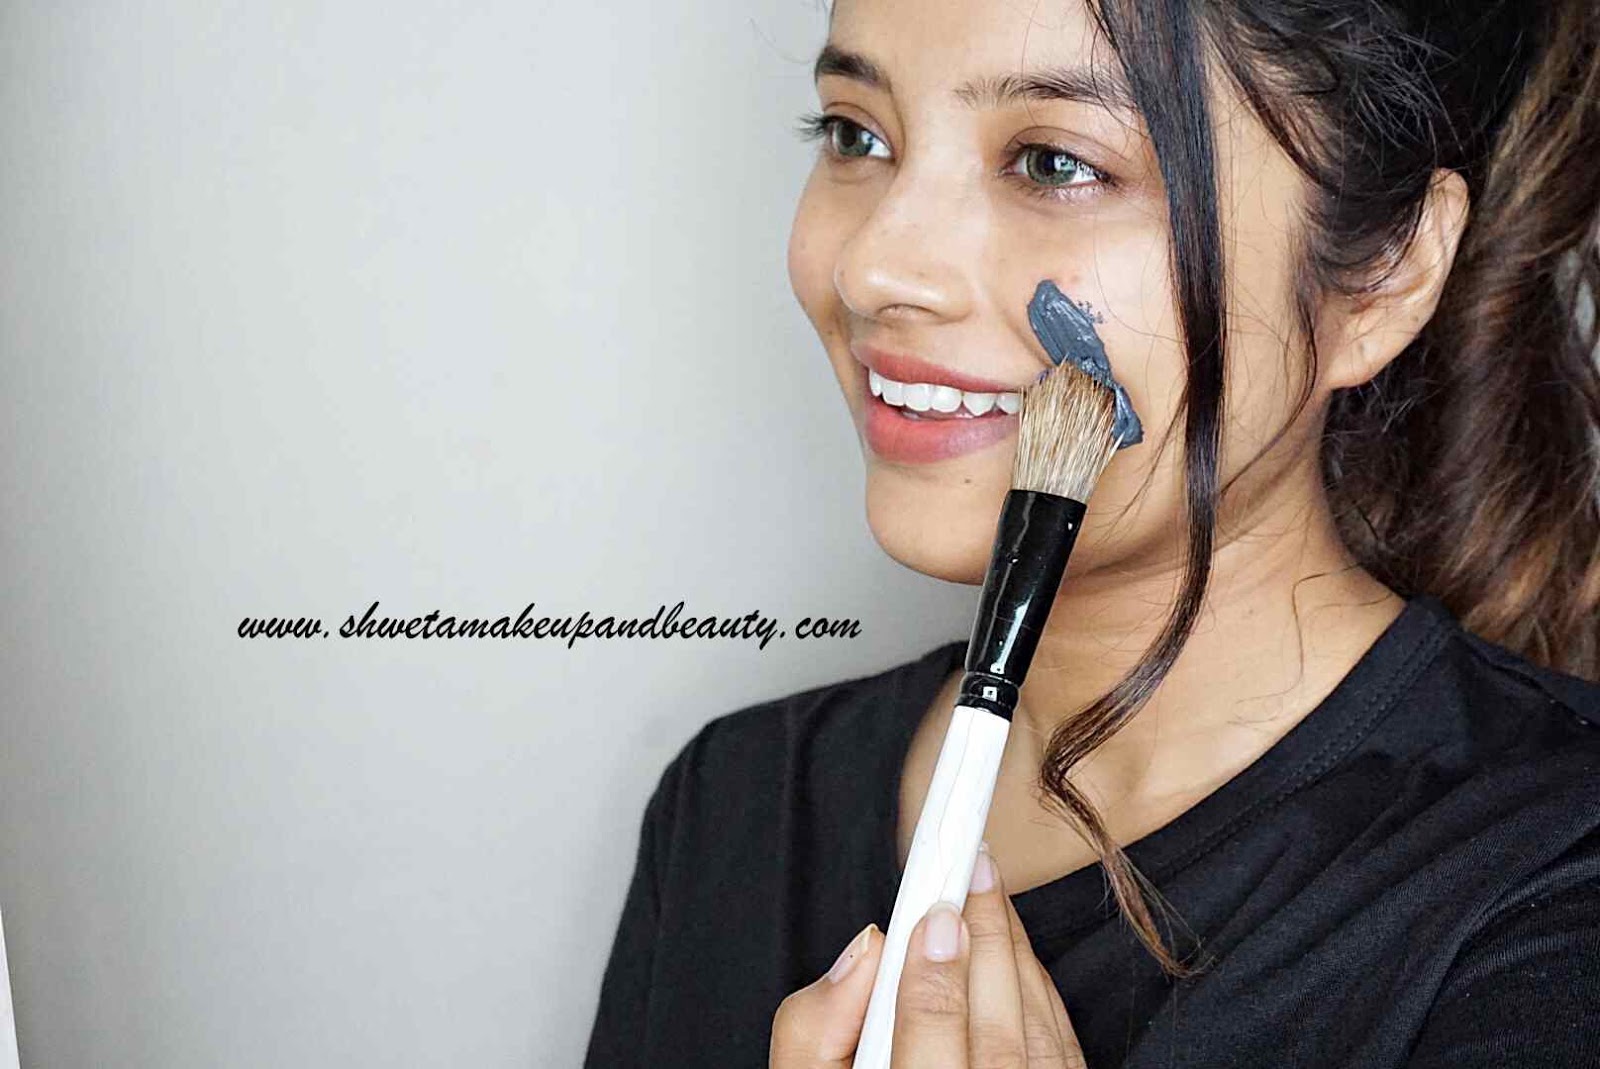 Mamaearth C3 Face Mask For Pigmentation Review After Pic Shweta Makeup Beauty